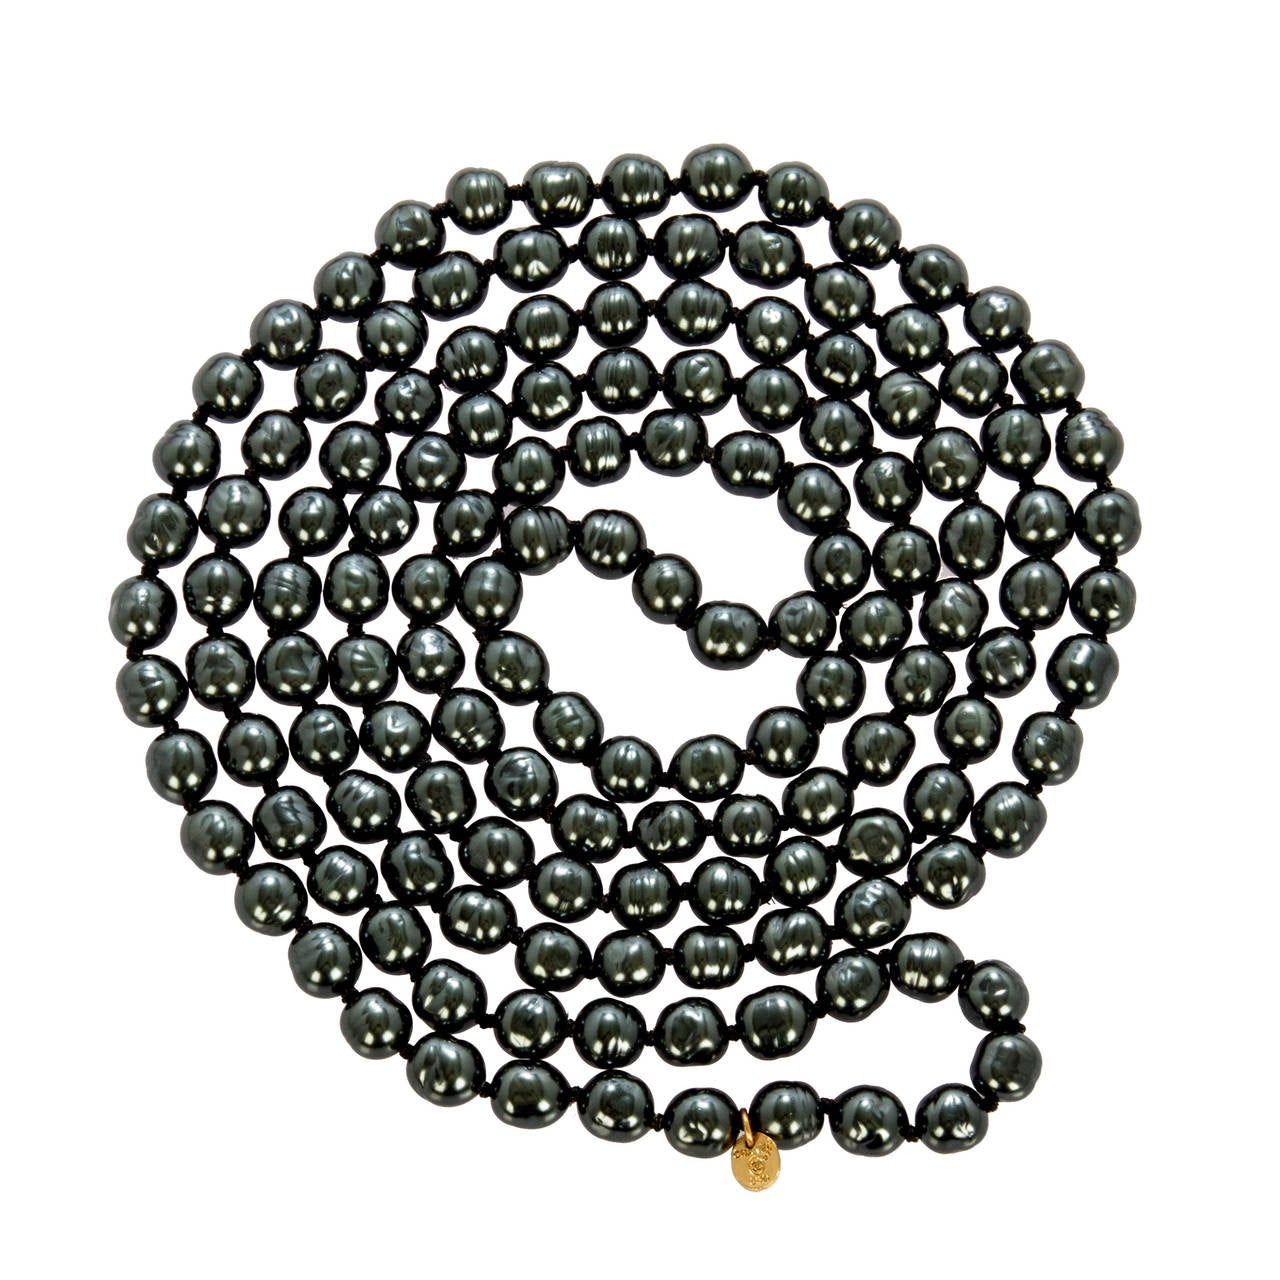 CHANEL Long Black Pearl Necklace